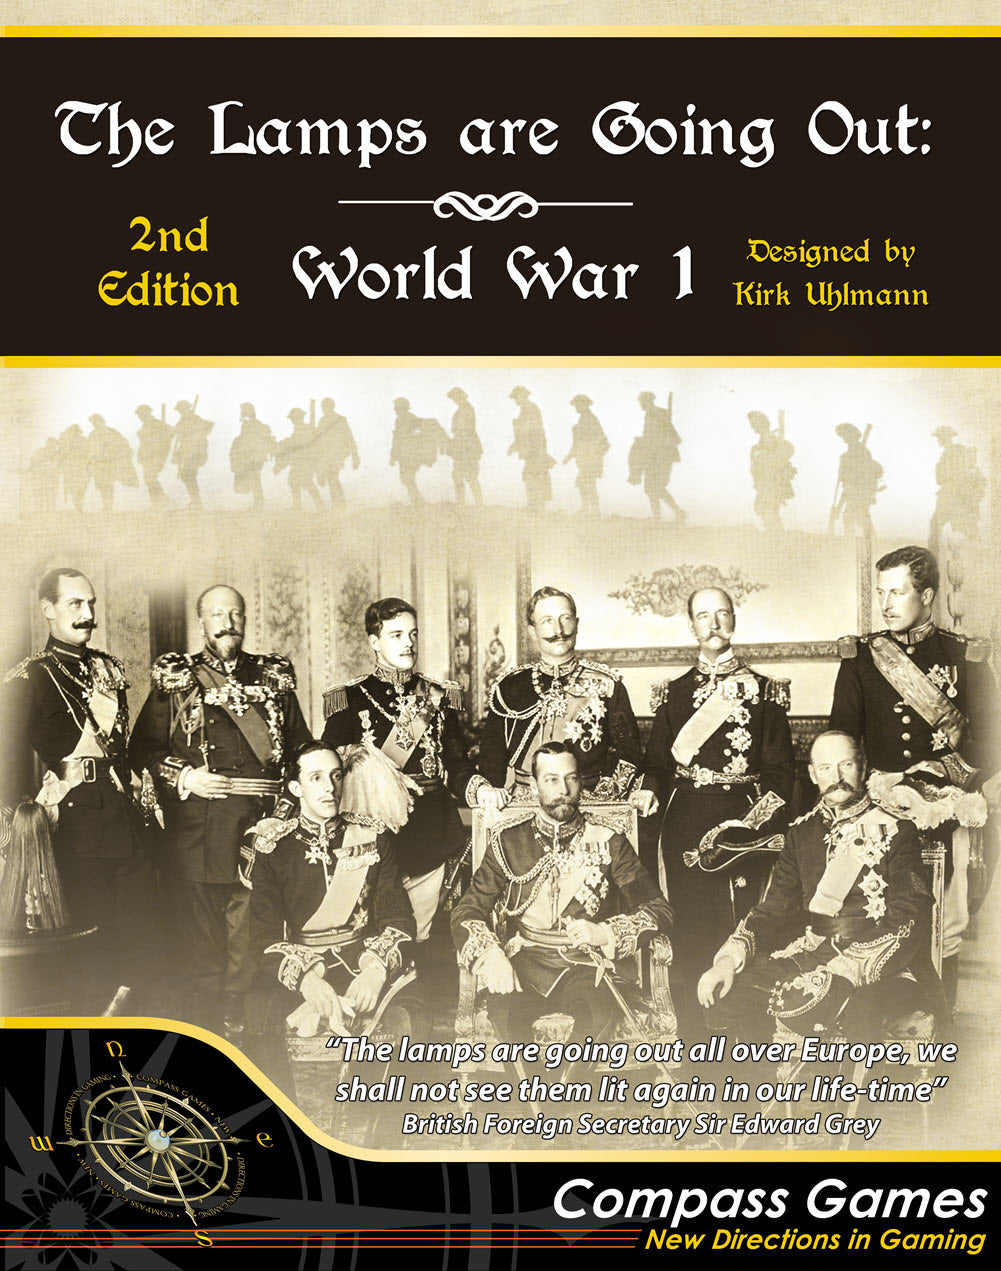 The Lamps are Going Out: World War 1 (2nd Ed.)